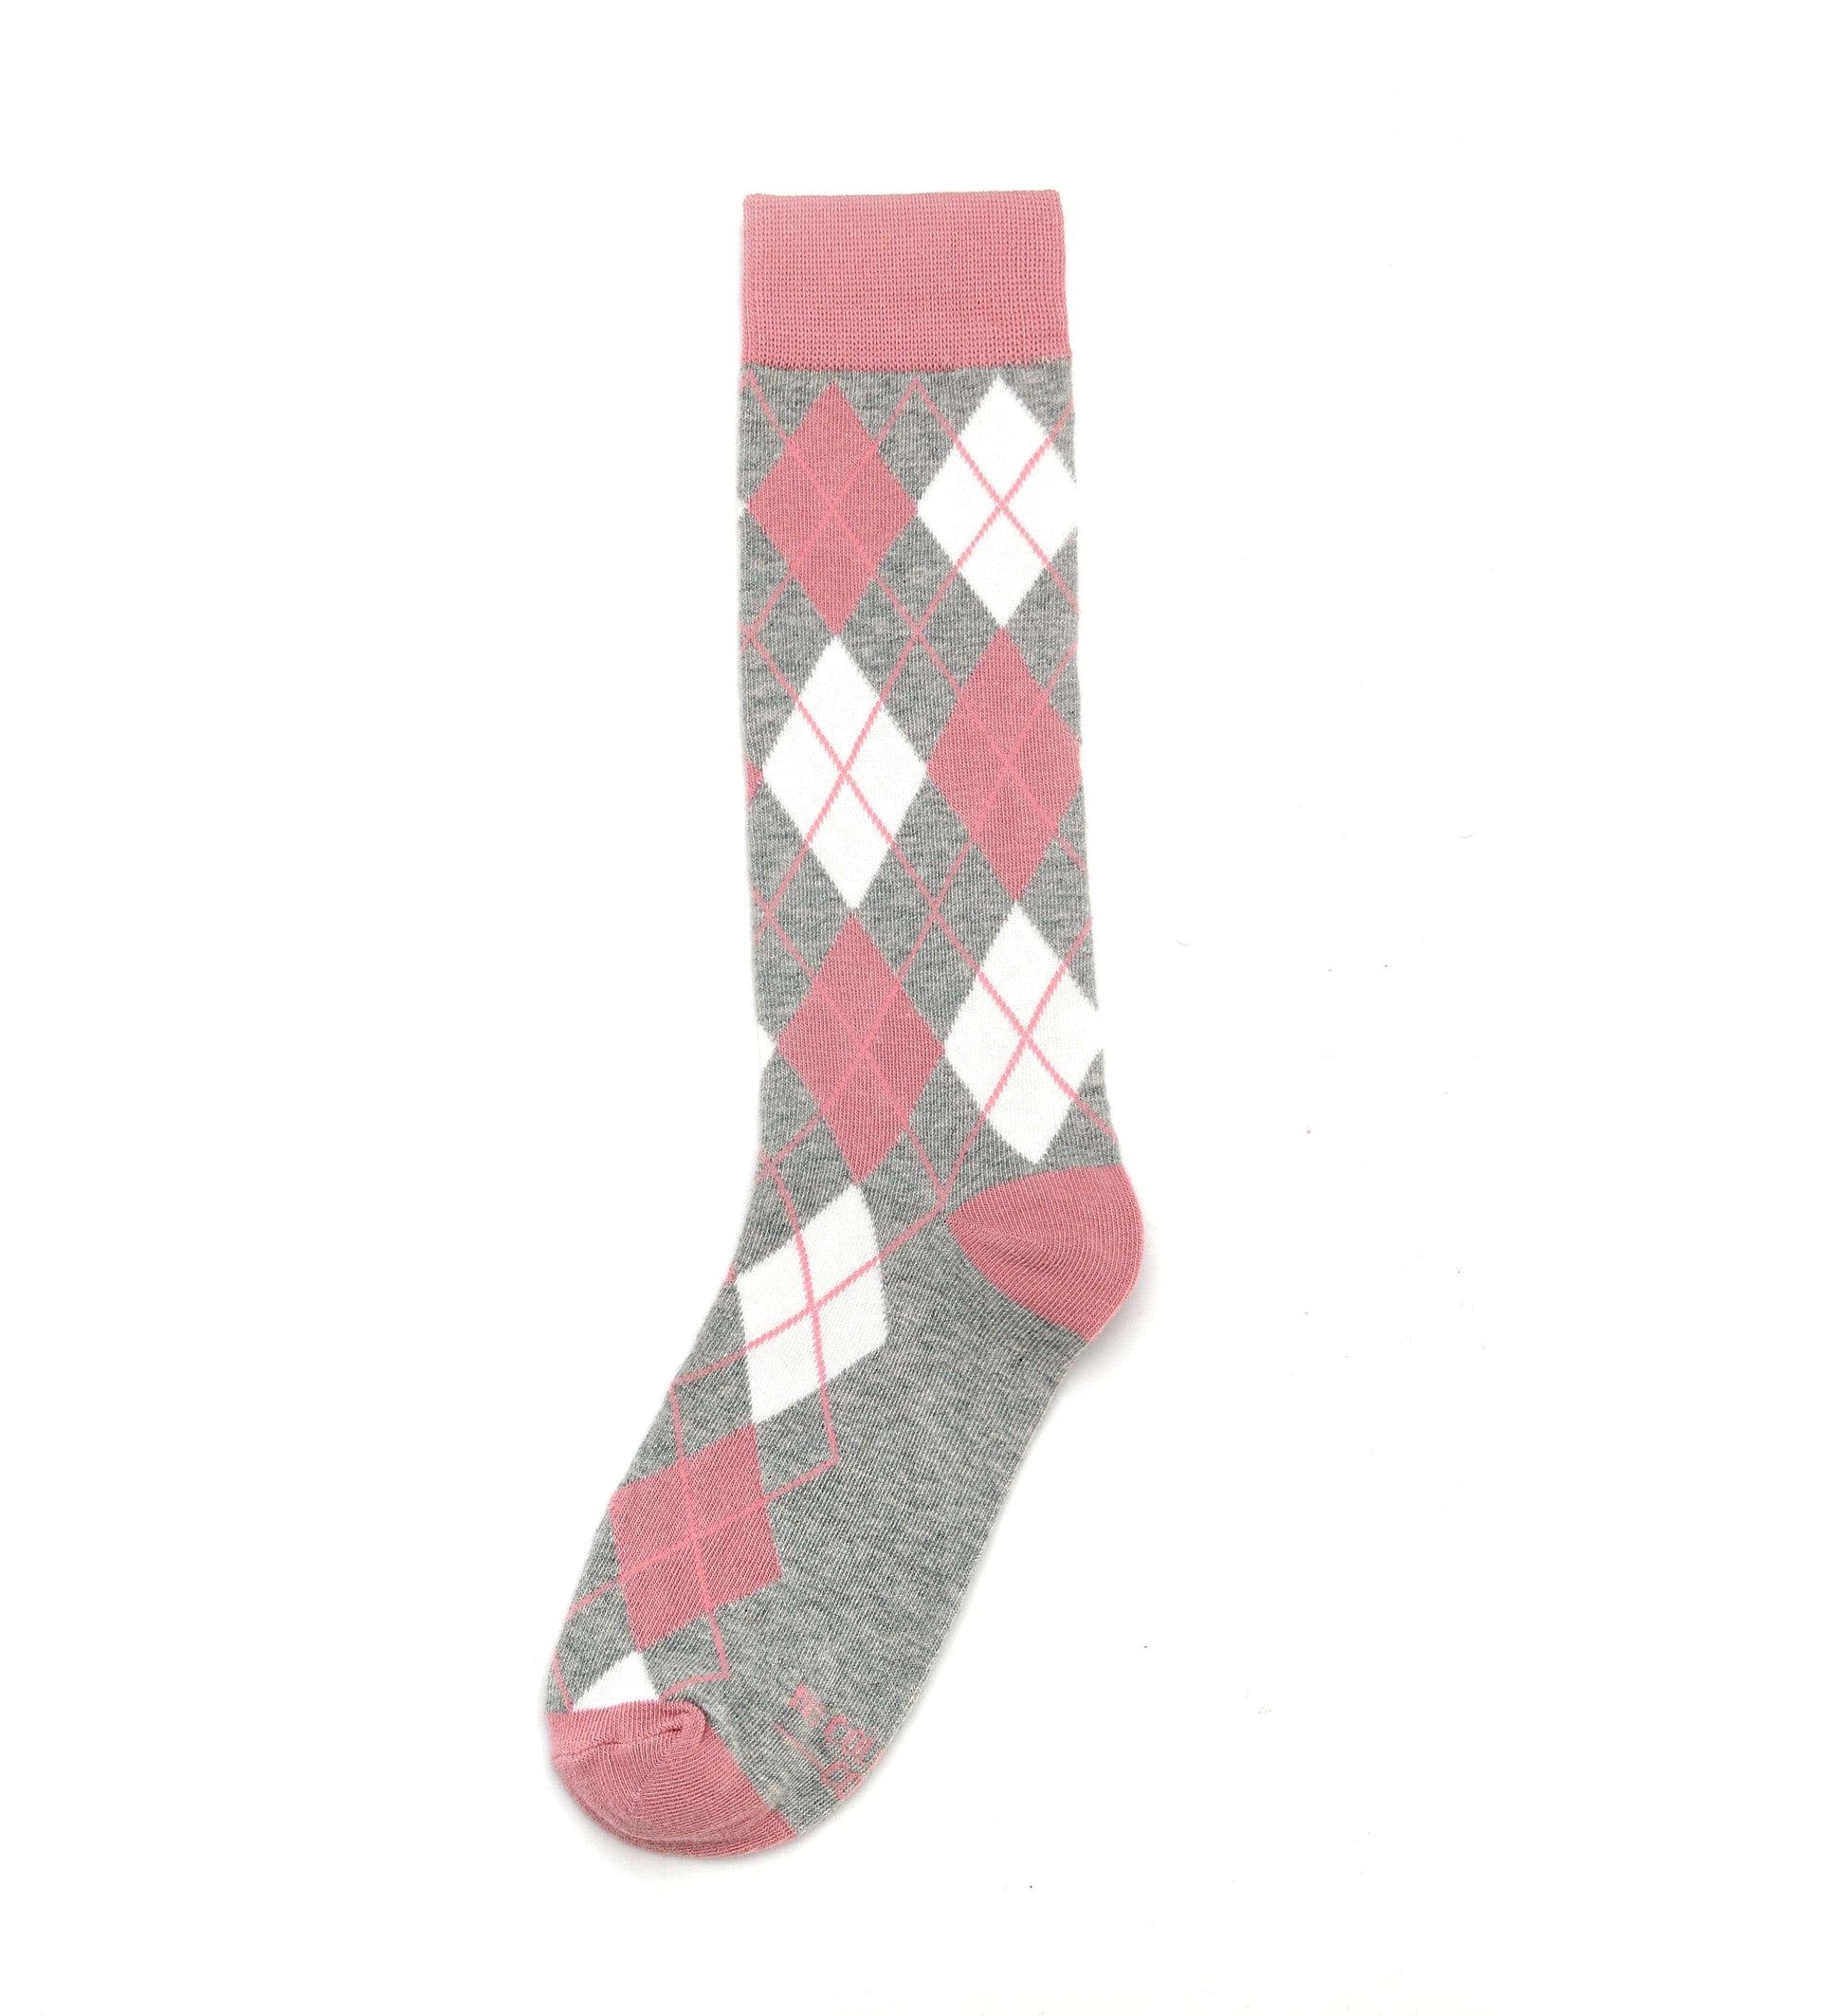 The No Cold Feet - Dusty Rose - Men's Gifts - Manly Bands